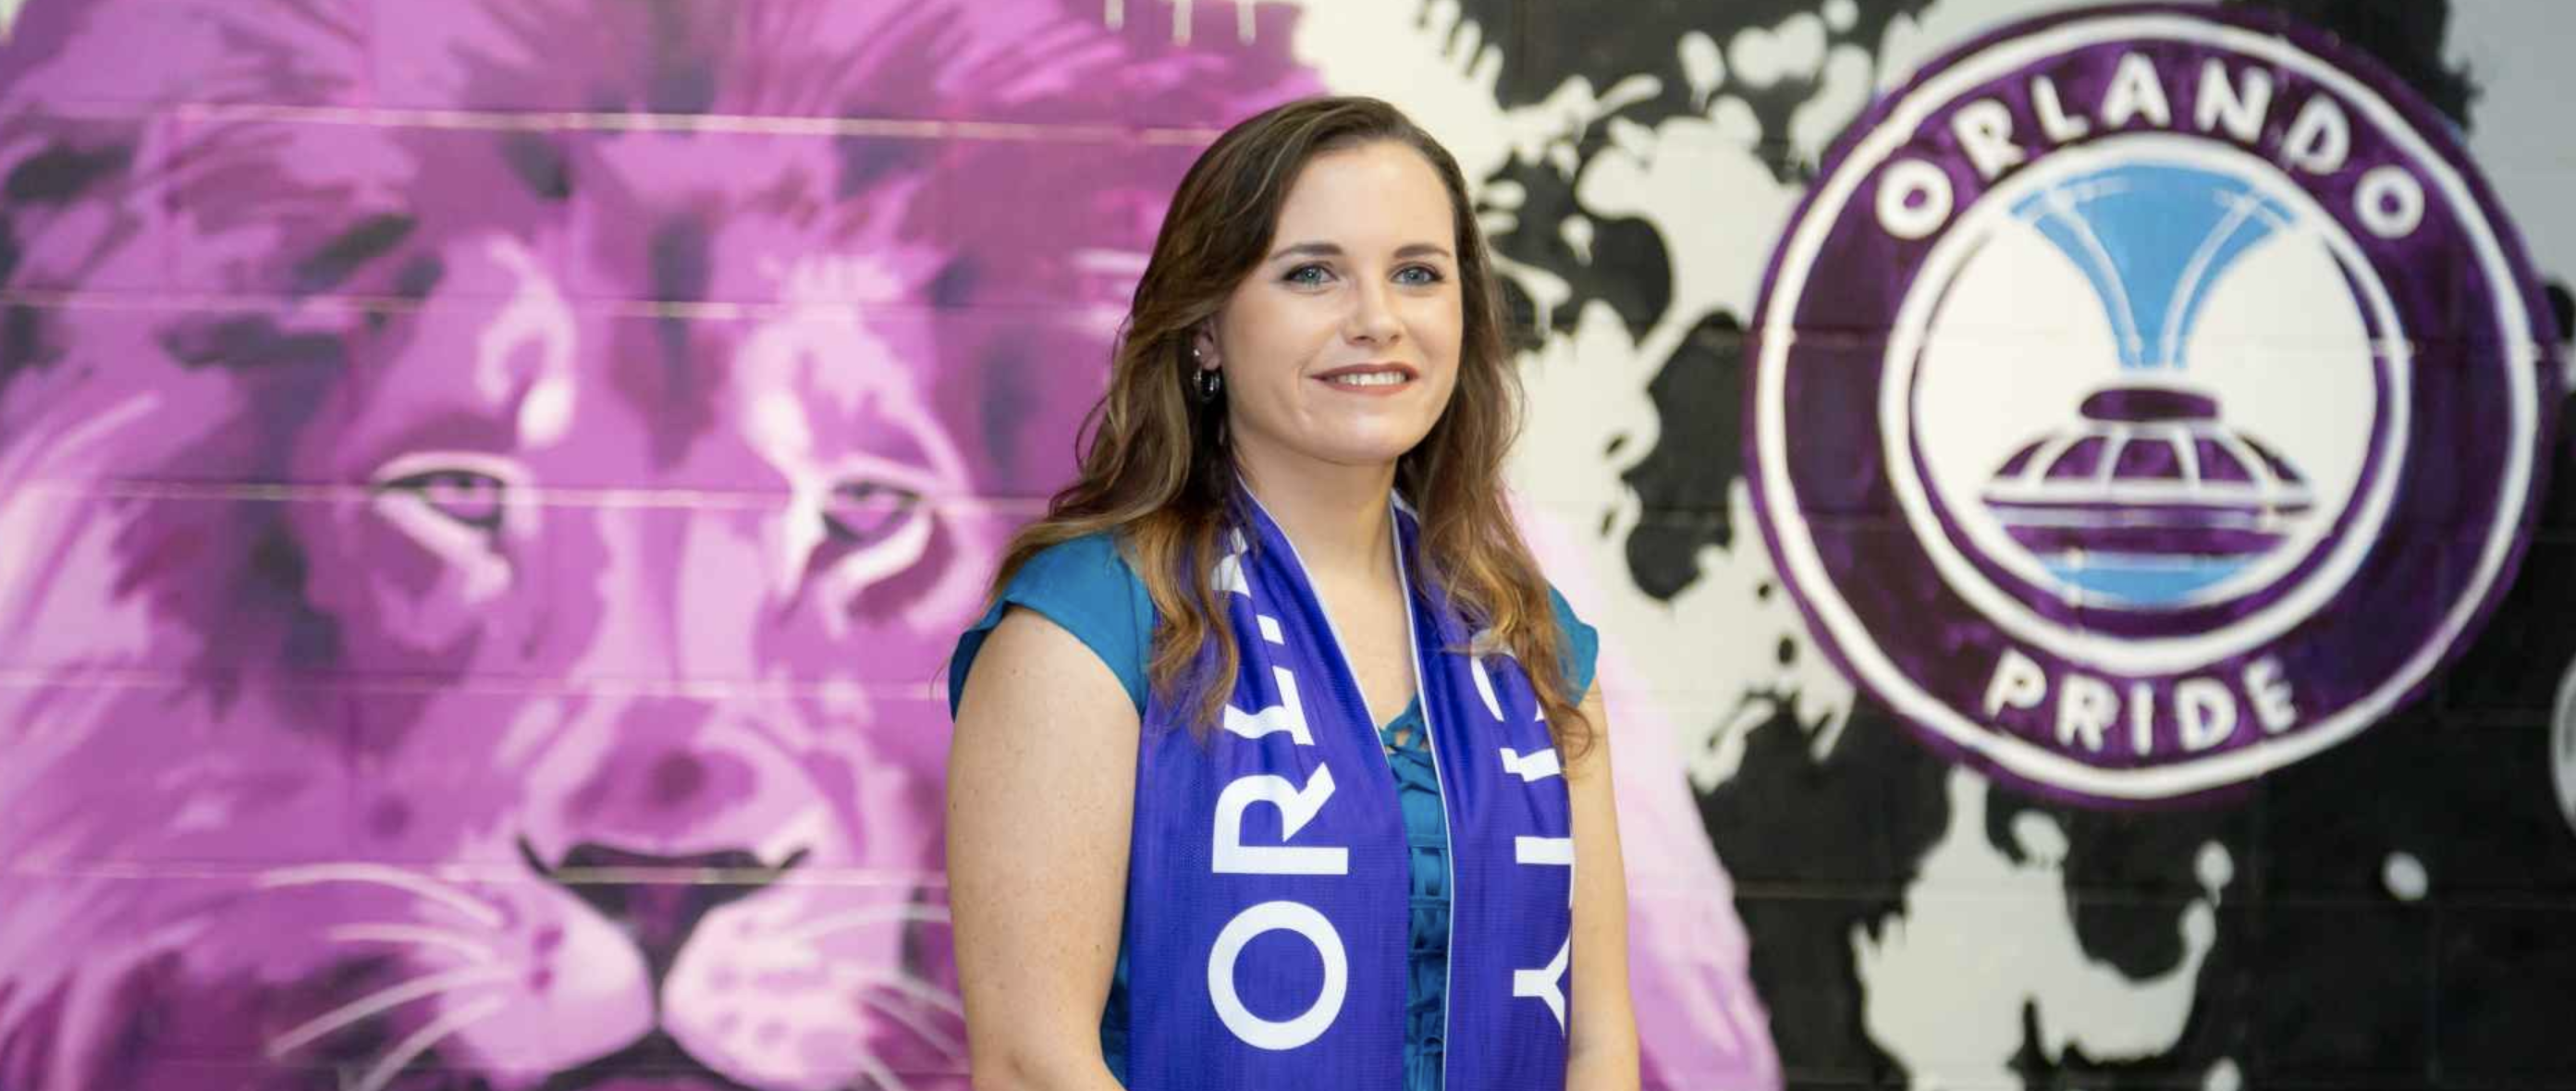 Danielle Head standing in front large painted mural, wearing blue drape around her neck that says "Orlando City"